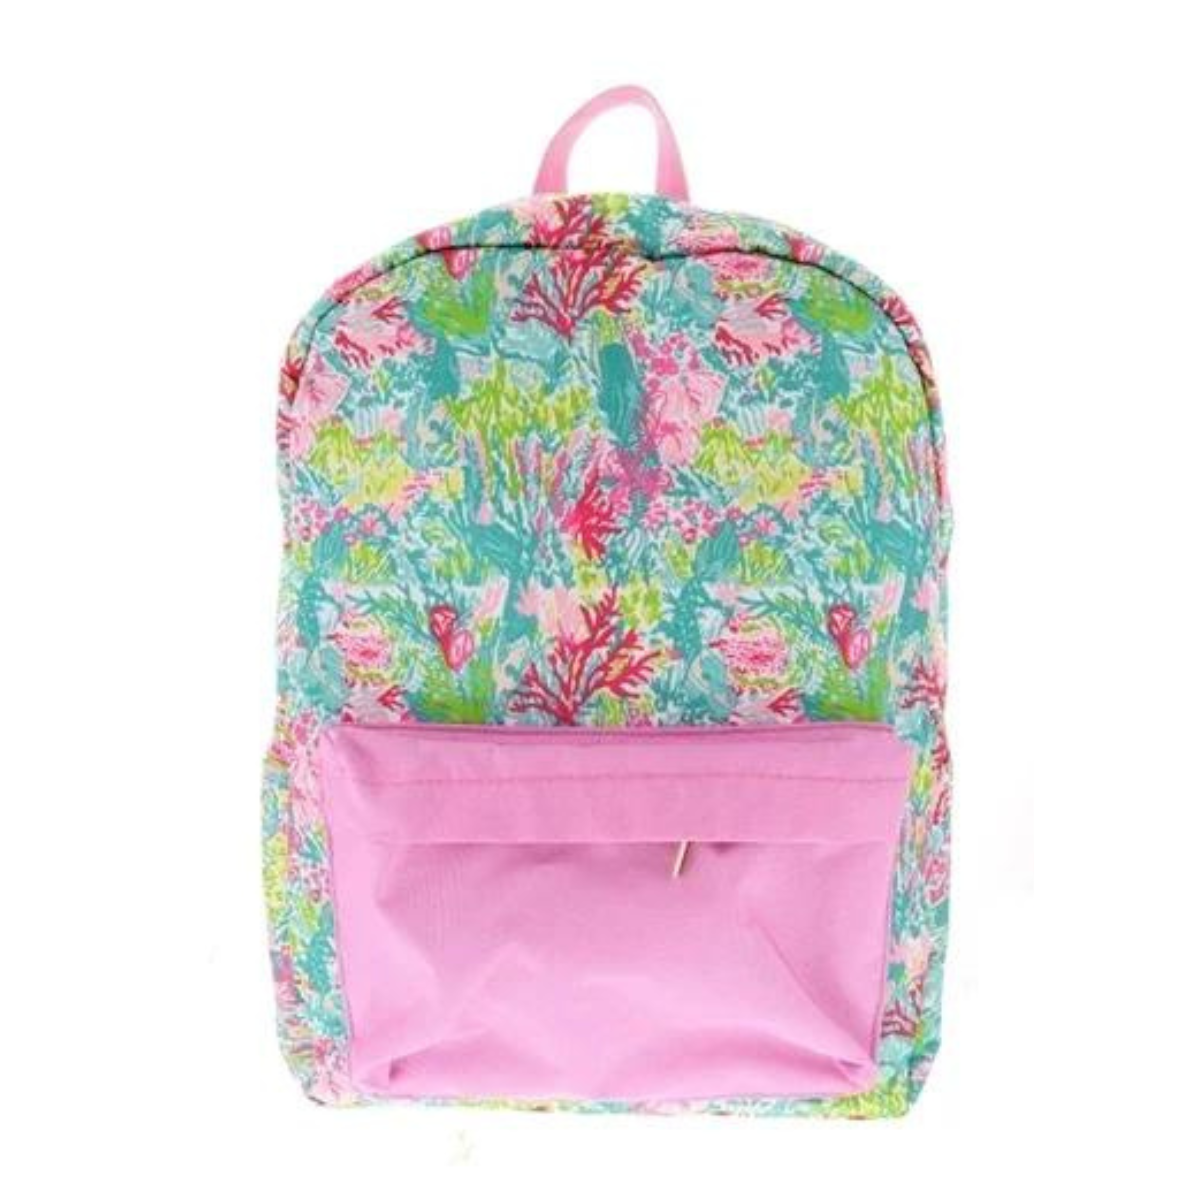 mermazing kids backpack on a white background